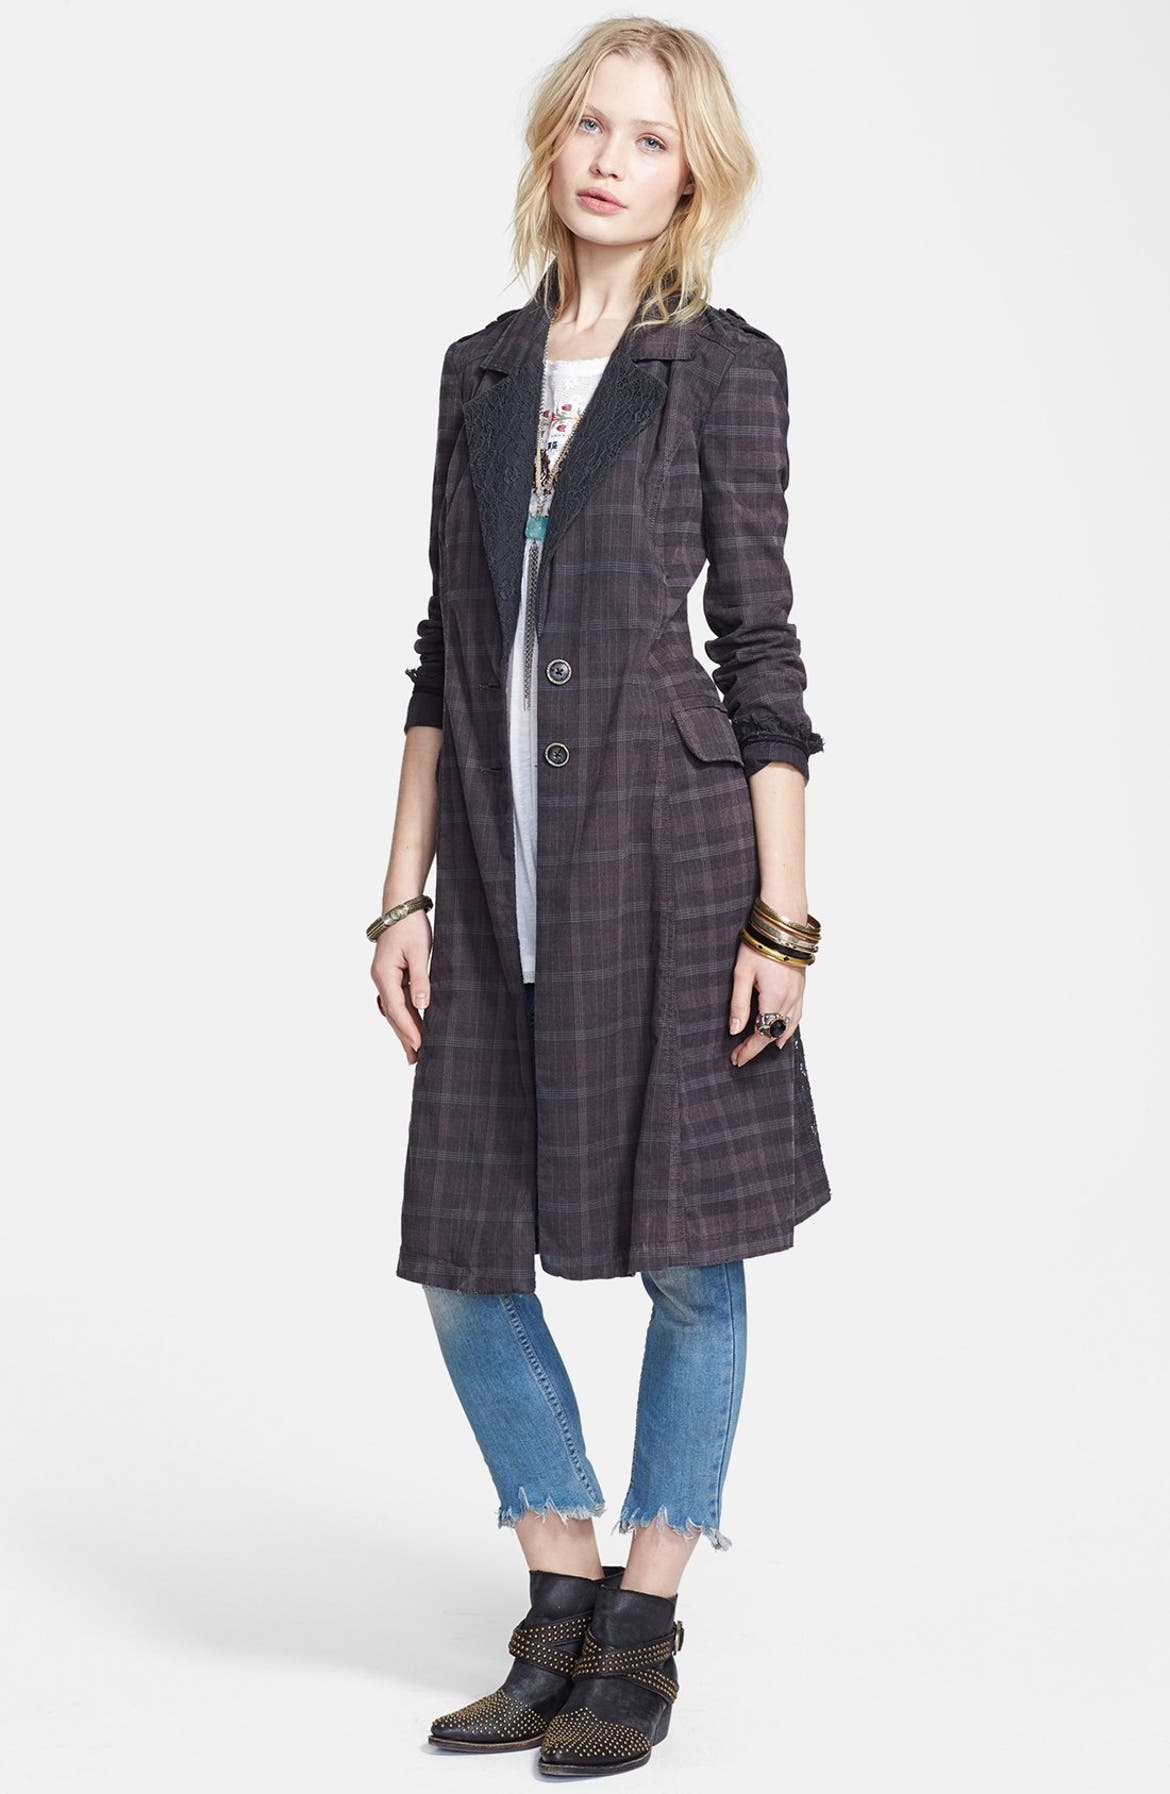 Free People Lace Trim Plaid Duster Jacket | Nordstrom